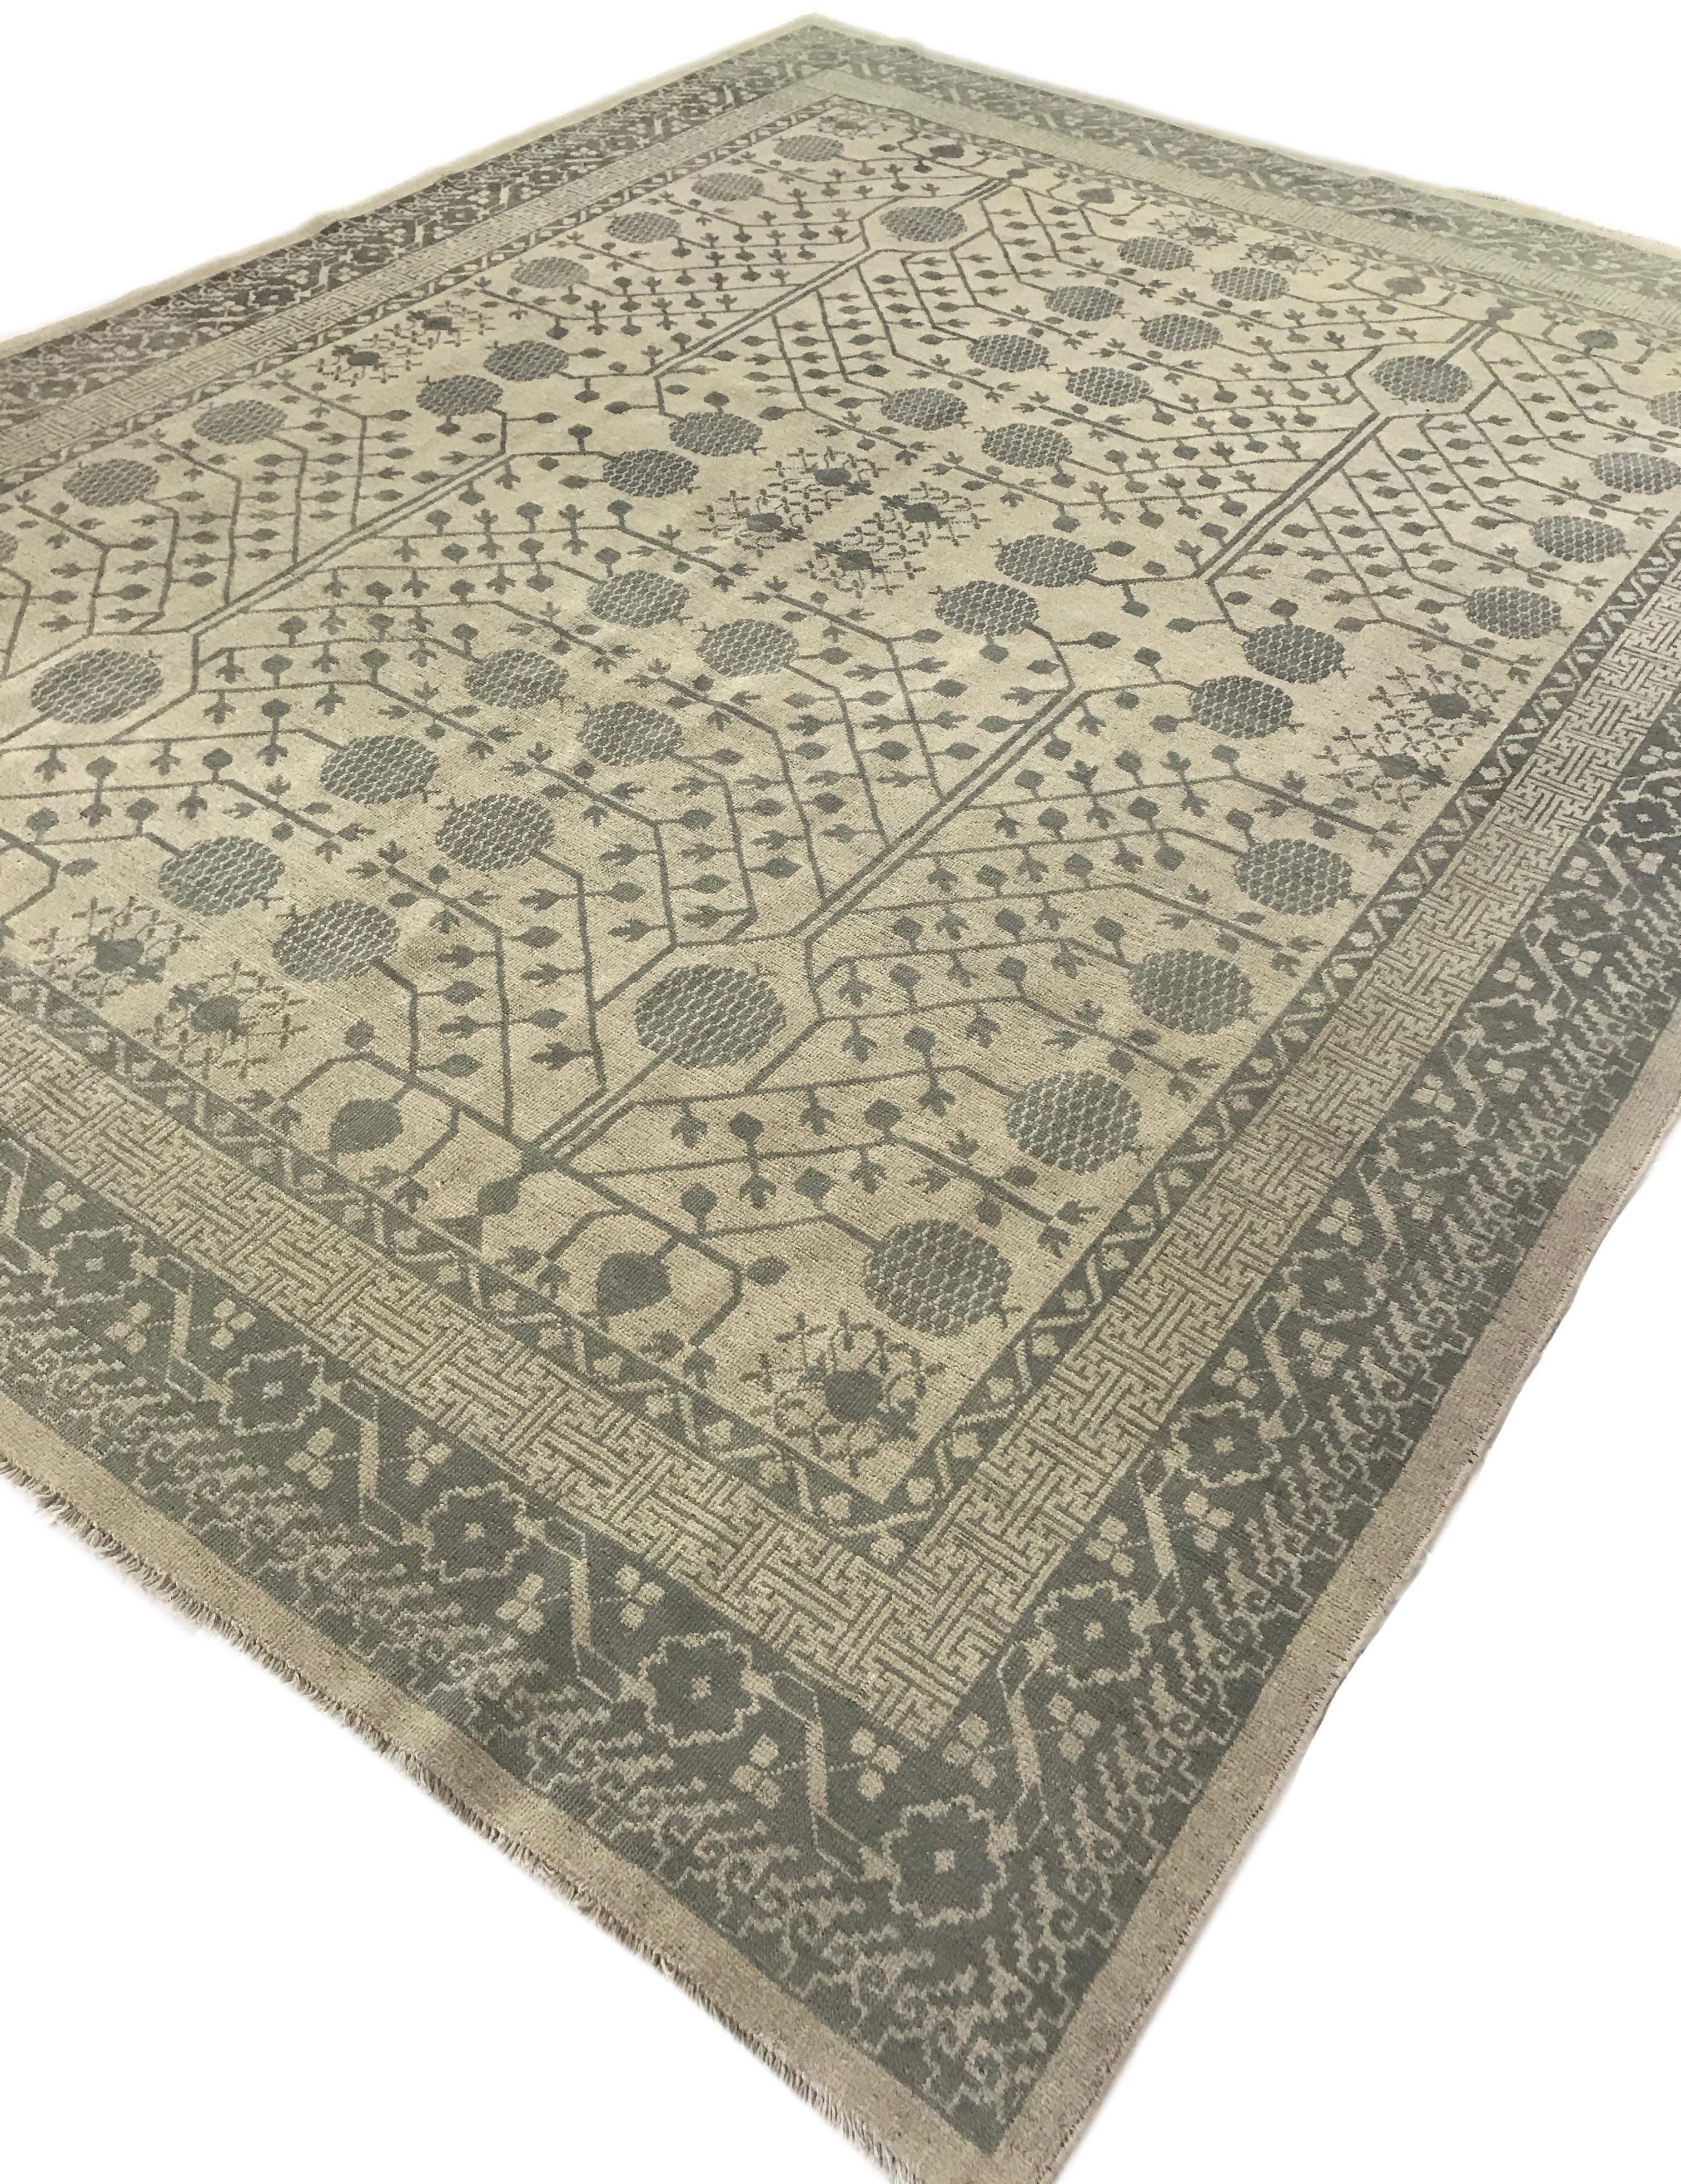 Pakistani Gray Pomegranate Design Hand Knotted Wool Area Rug For Sale